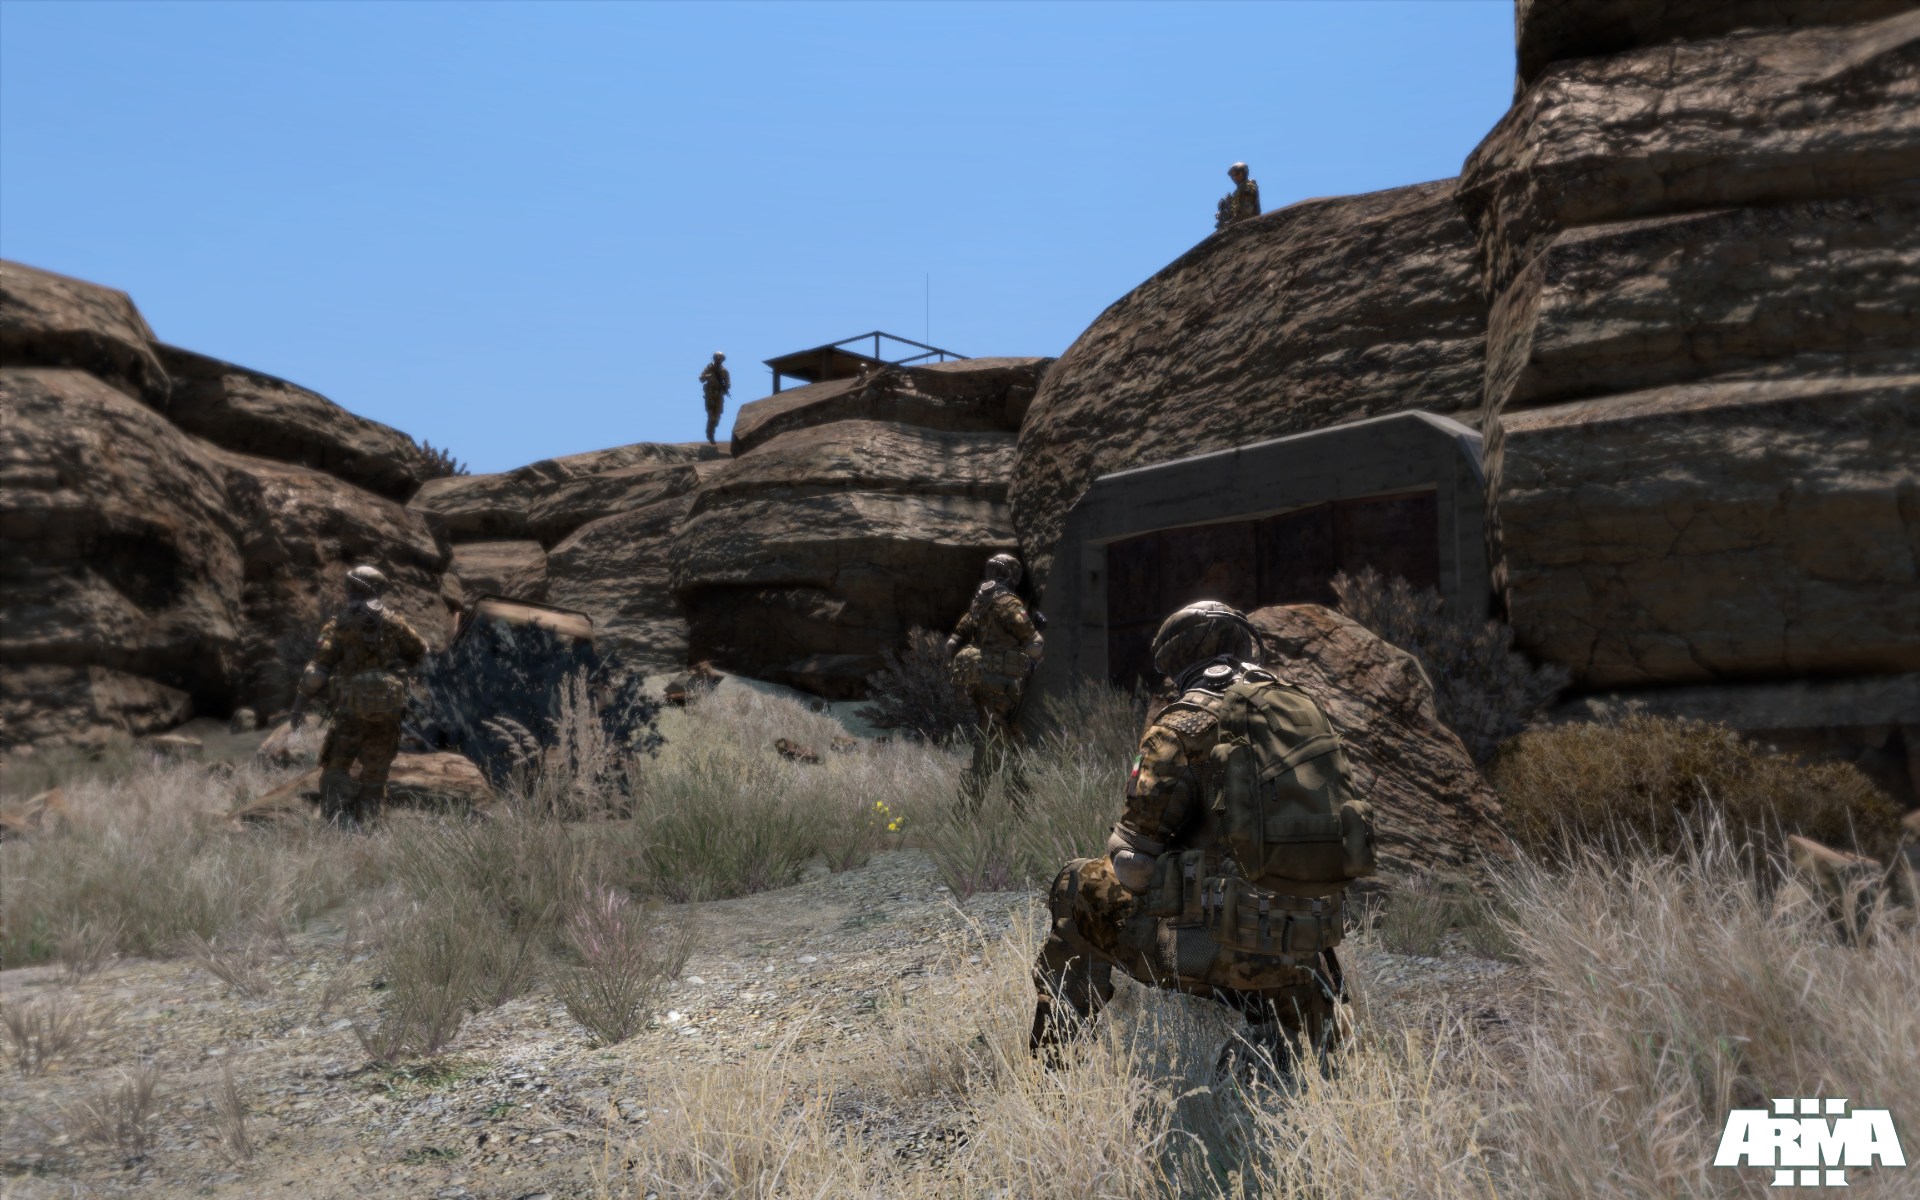 Arma 3 Hands On Impressions